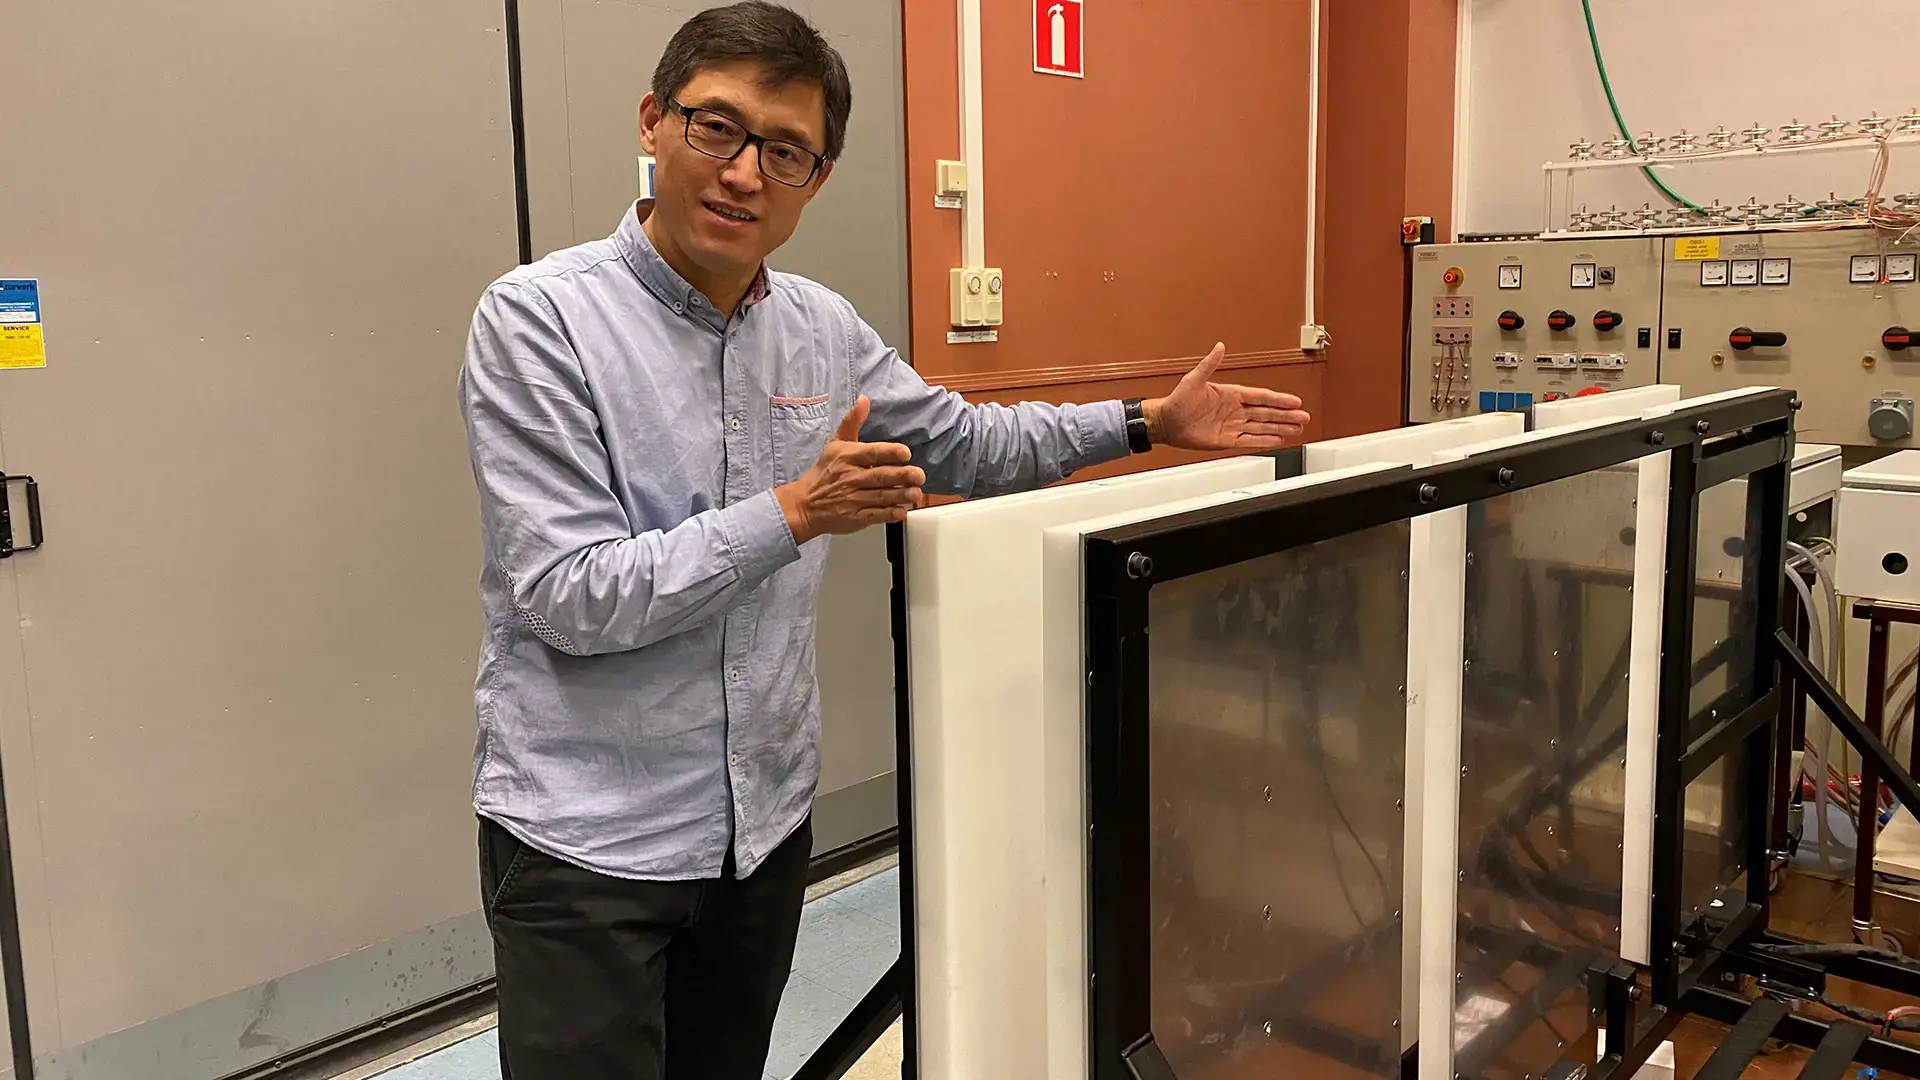 Professor Yujing Liu shows the 500 kW inductive charging system which can be suitable for charging of electric ferries, trucks, and buses. DC (direct current) to DC efficiency can reach 98 percent. It transfers 500 kW per 2 square meters with 15 cm air gap between the ground pad and the onboard pad.